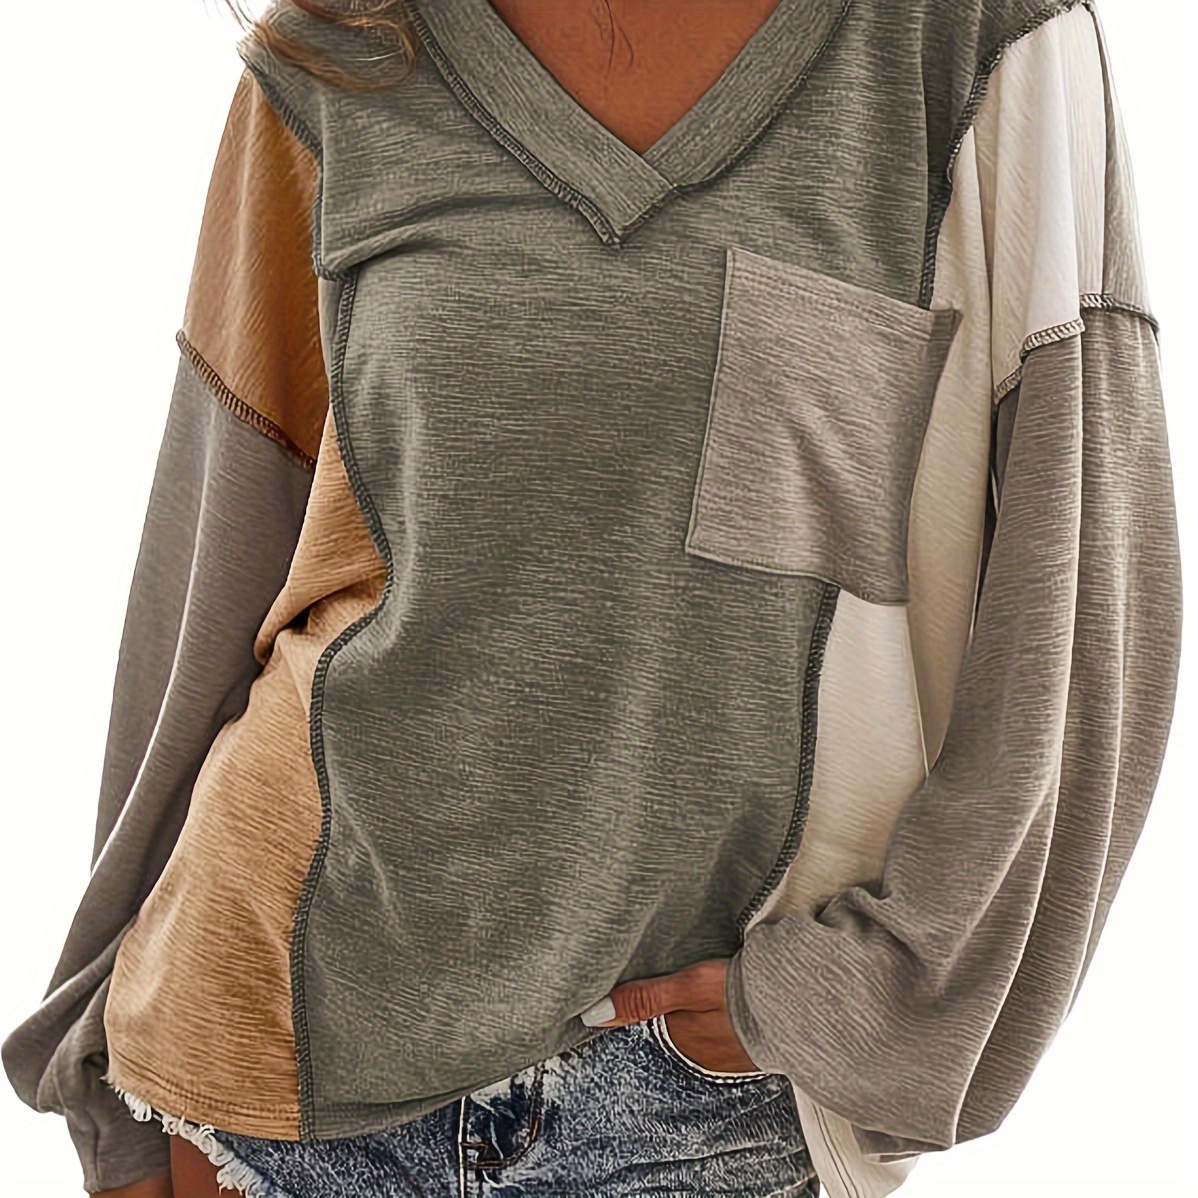 

Top-stitching V Neck T-shirt, Casual Long Sleeve T-shirt For Spring & Fall, Women's Clothing